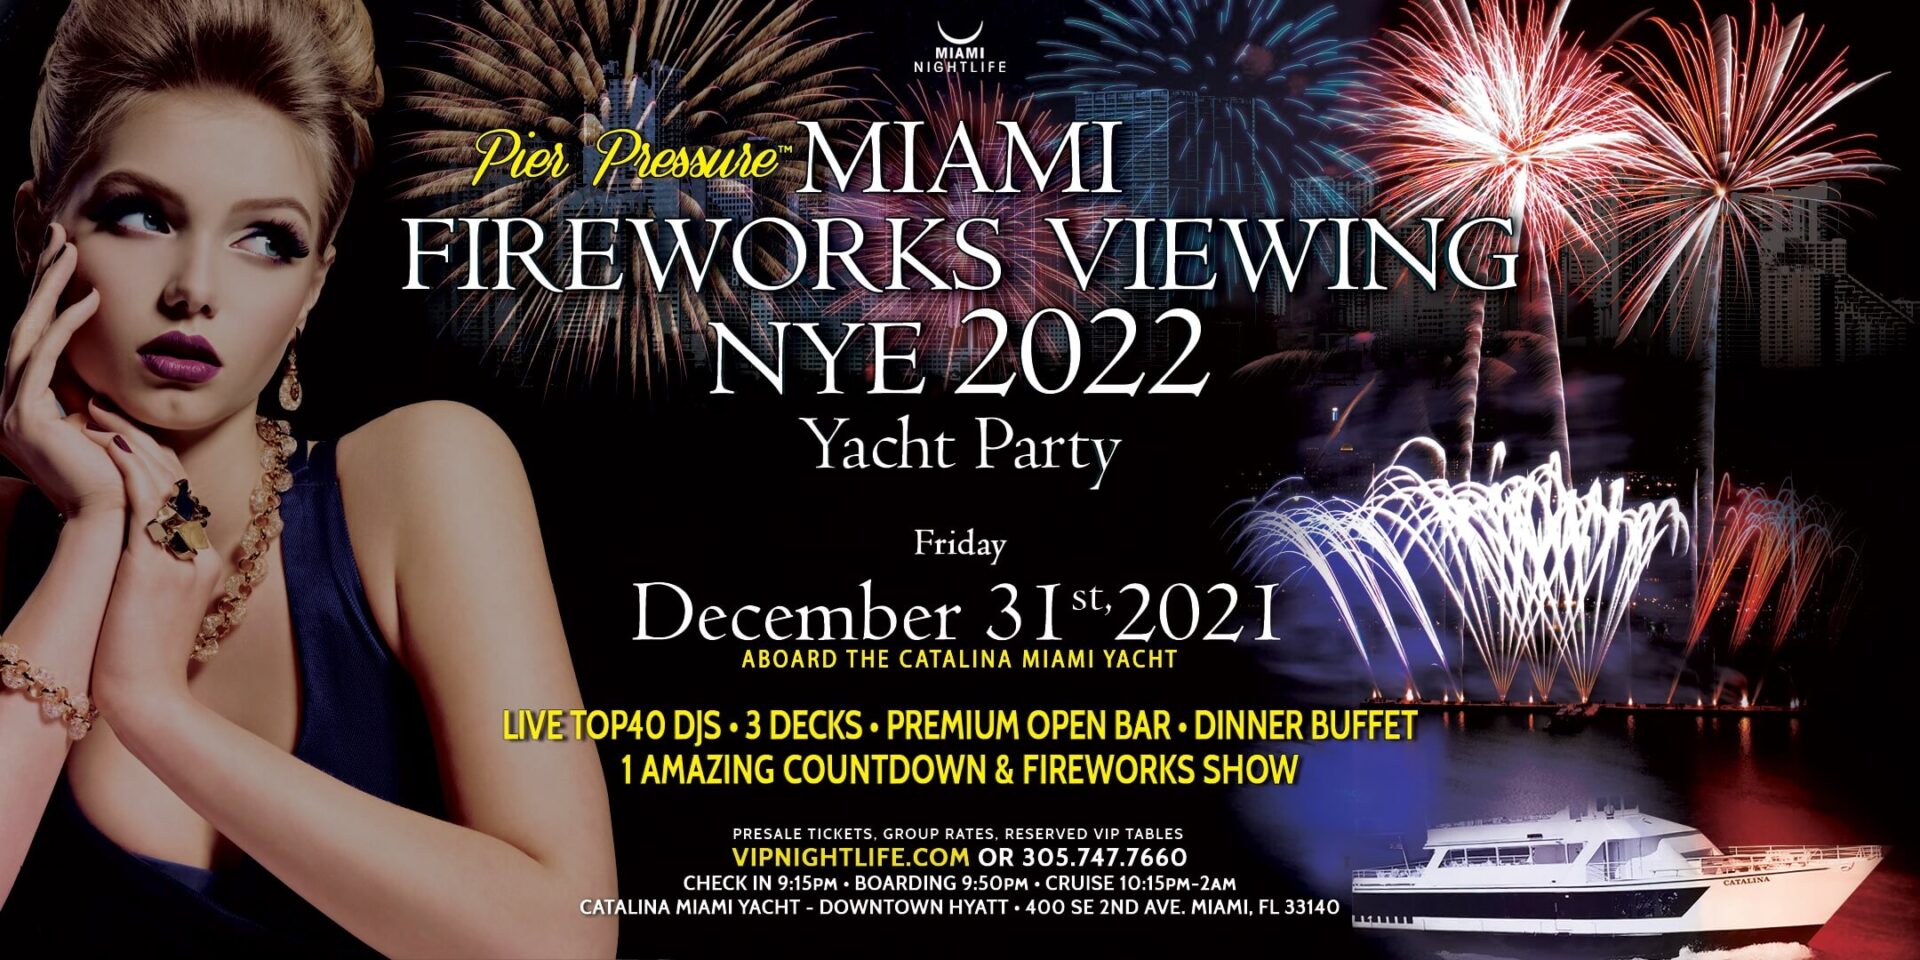 Miami Fireworks Viewing Pier Pressure New Year’s Eve Yacht Party 2022